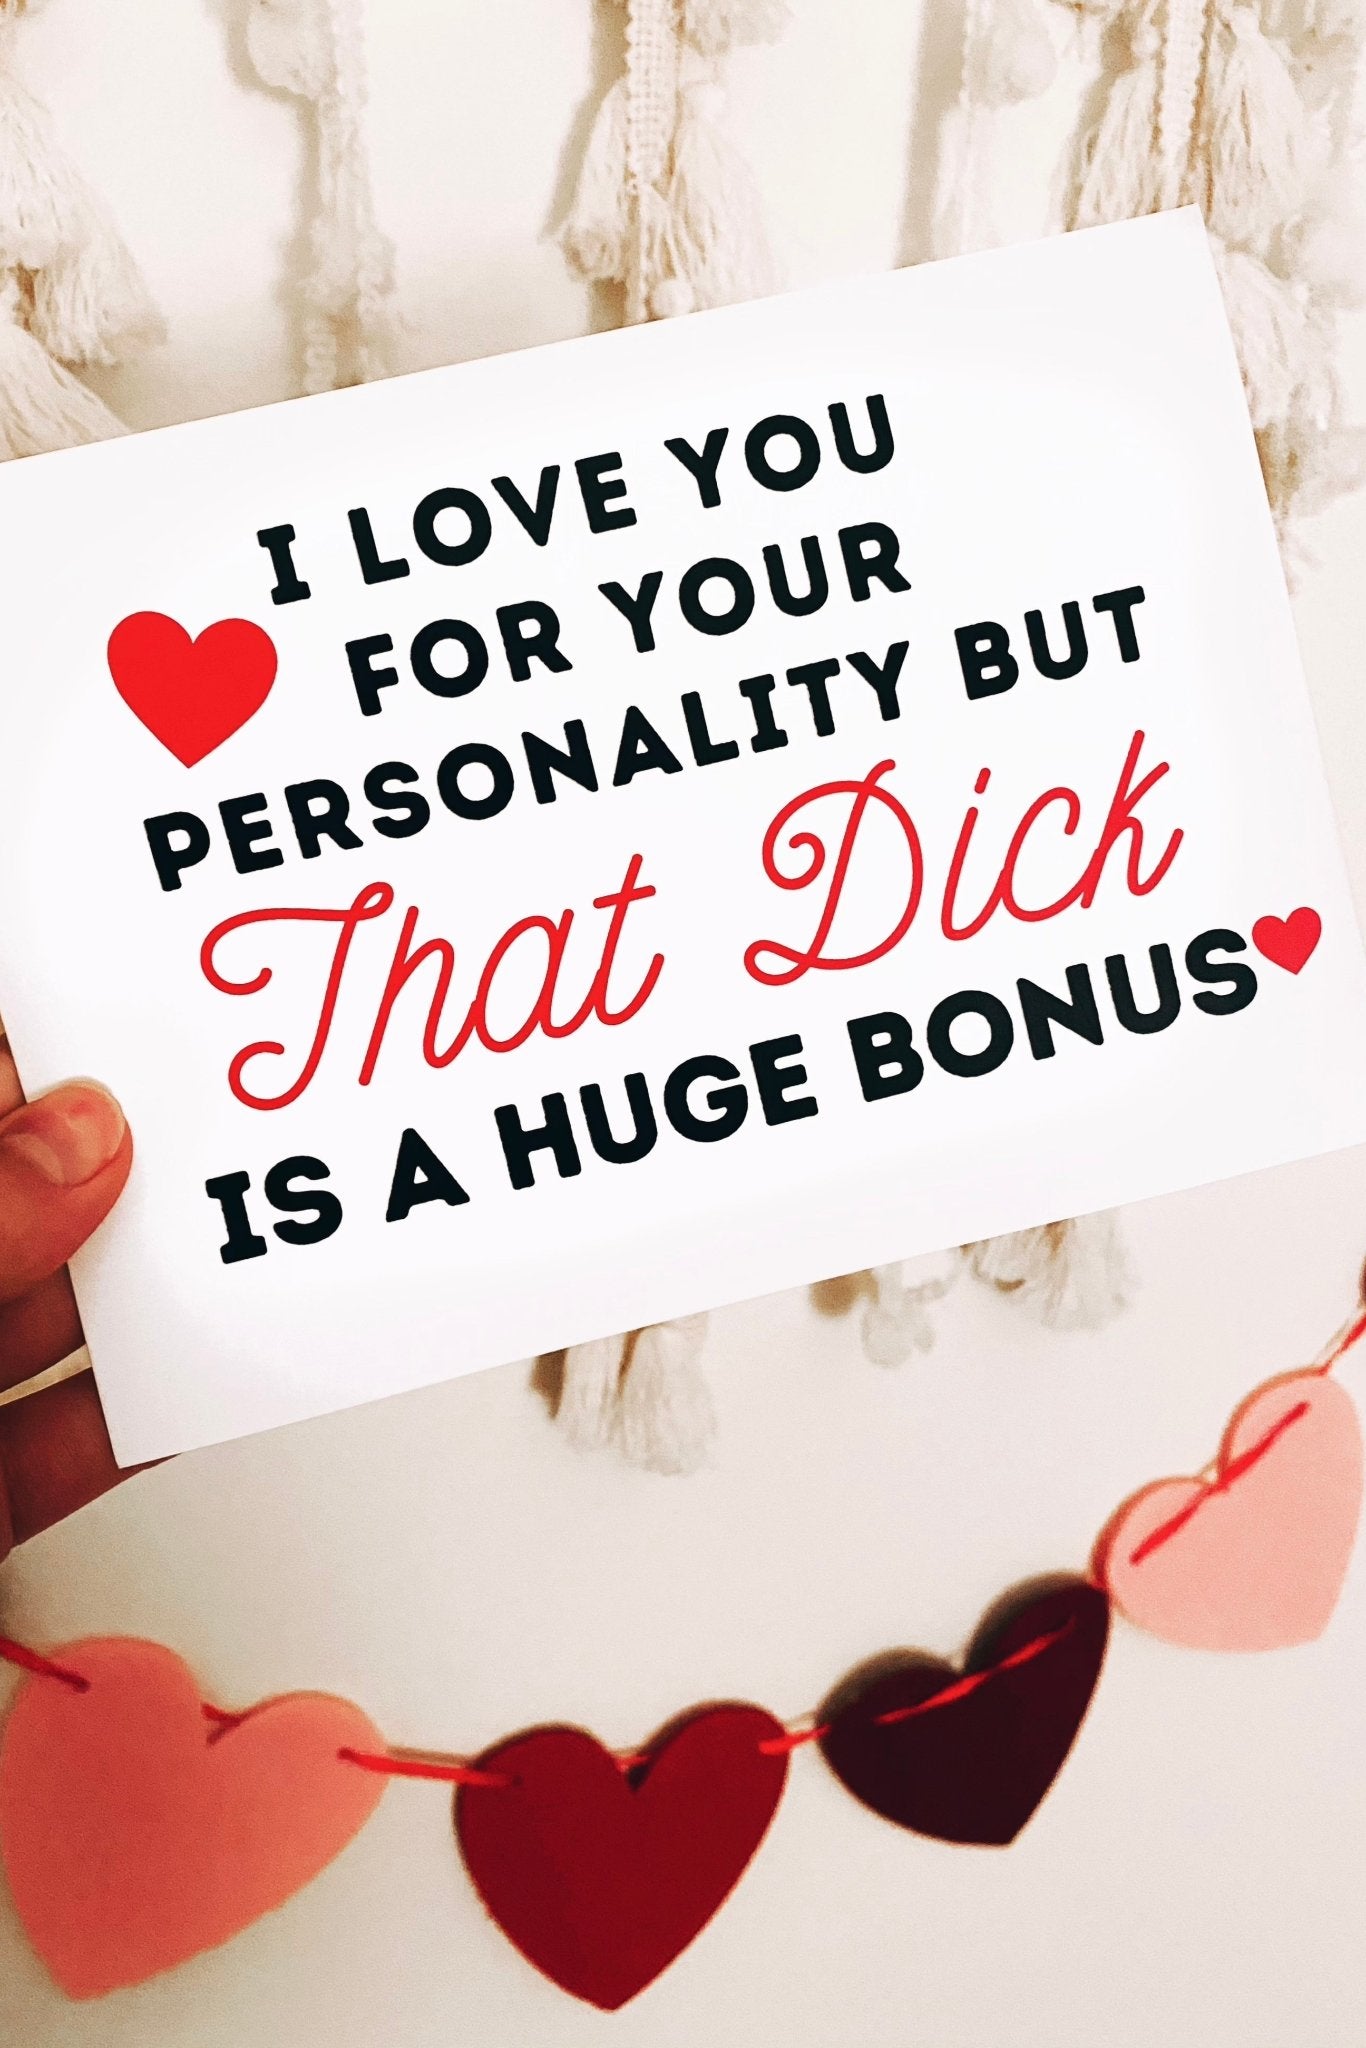 I Love You For Your Personality But That Dick Is A Huge Bonus Greeting Card - UntamedEgo LLC.